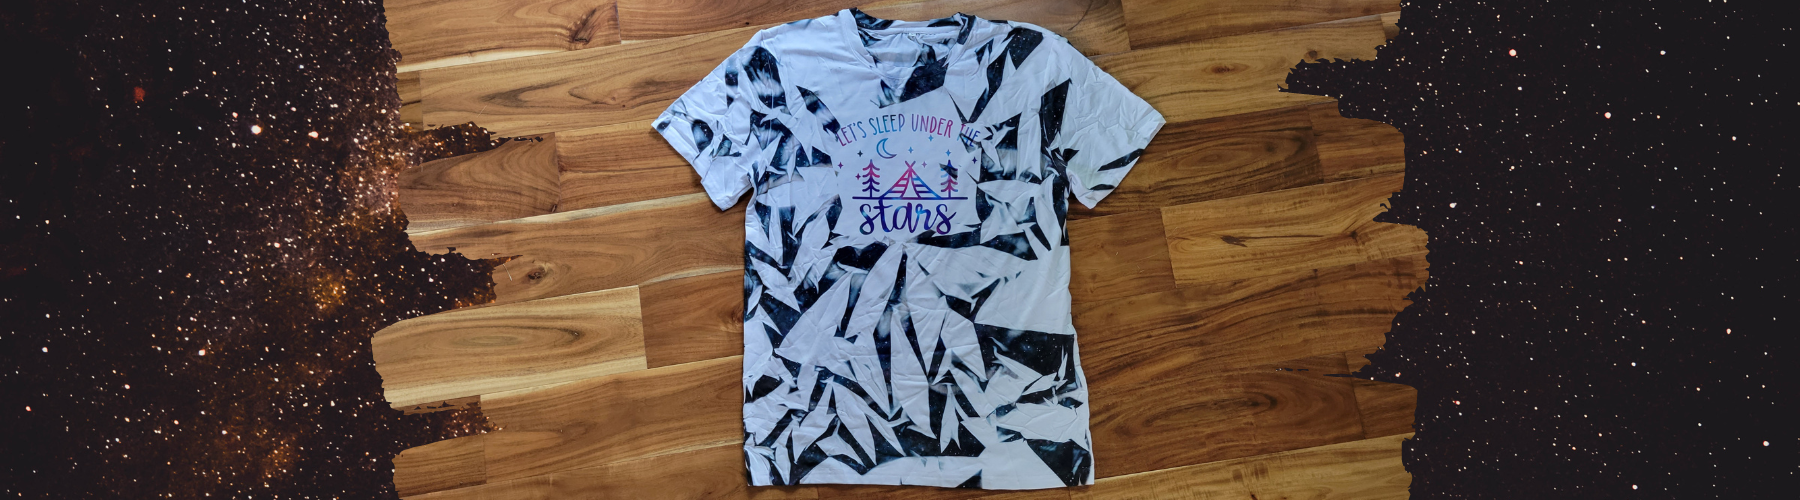 How to Make a Cool Tie Dye Shirt With Sublimation or Infusible Ink